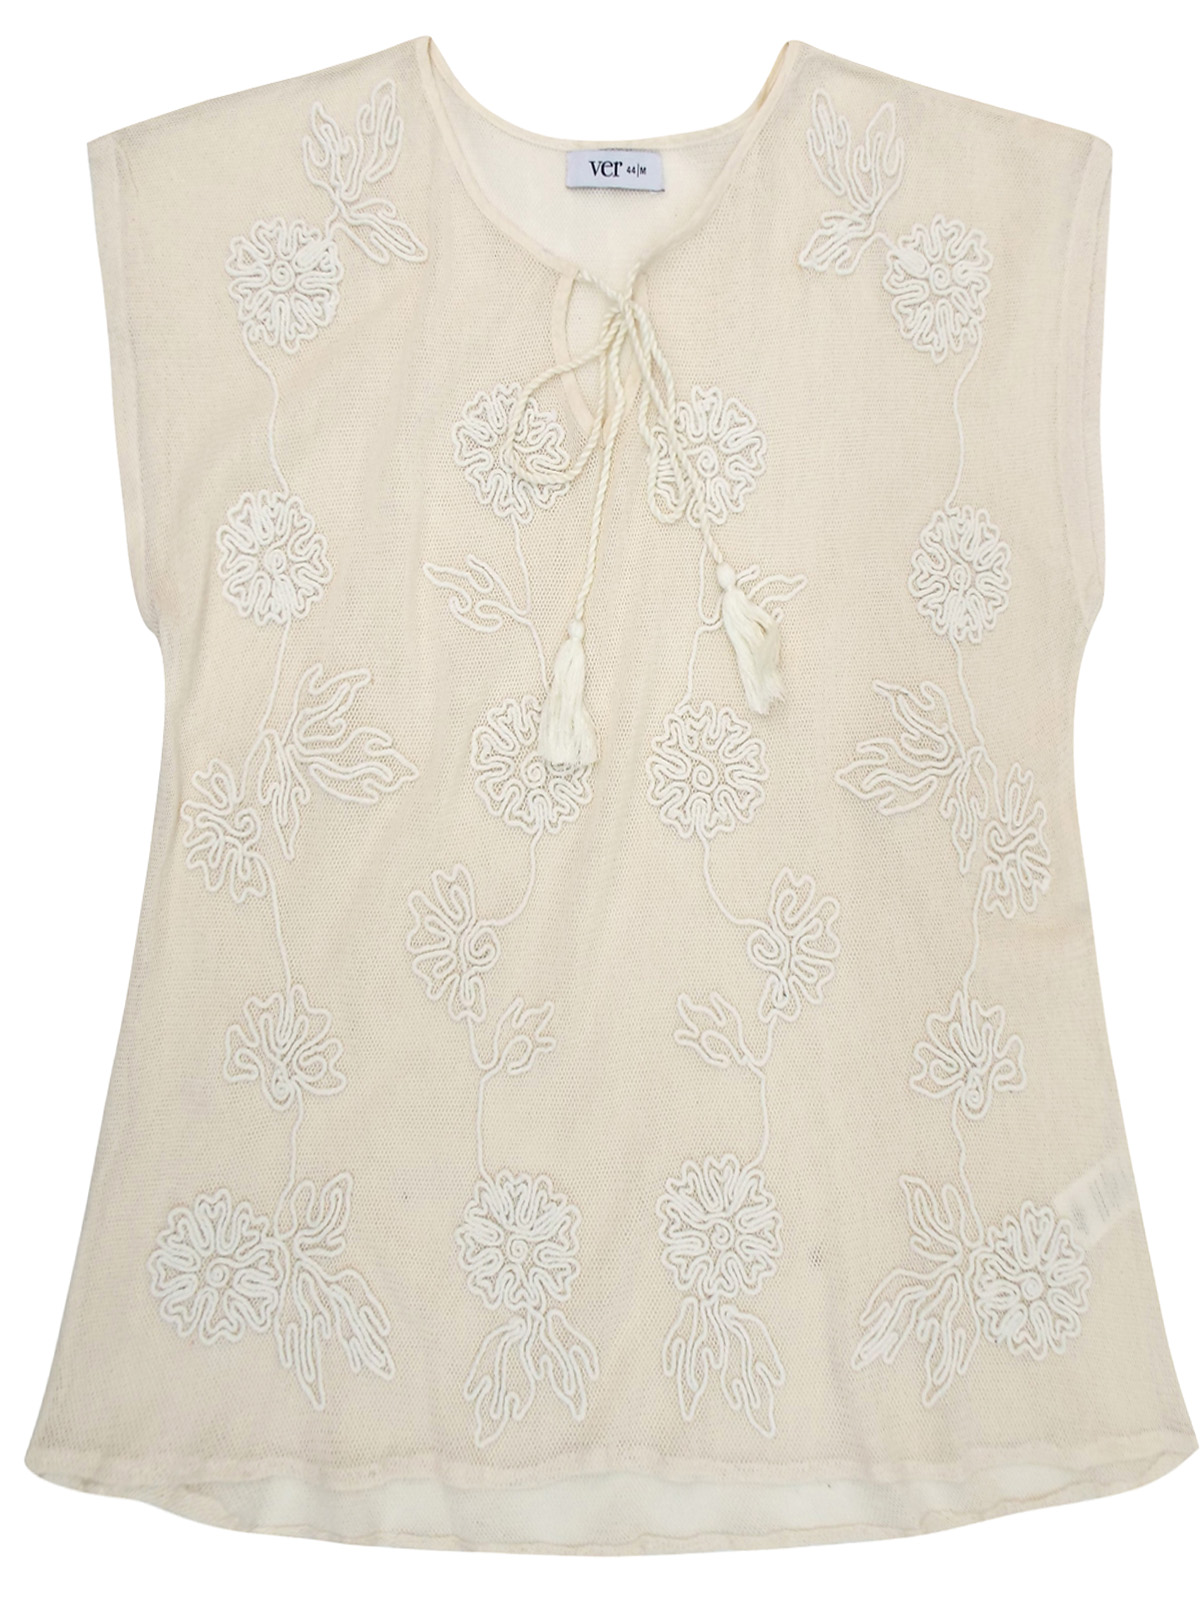 Ver - - Ver CREAM Pure Cotton Embroidered Flowers Blouse - Size 8 to 16 ...